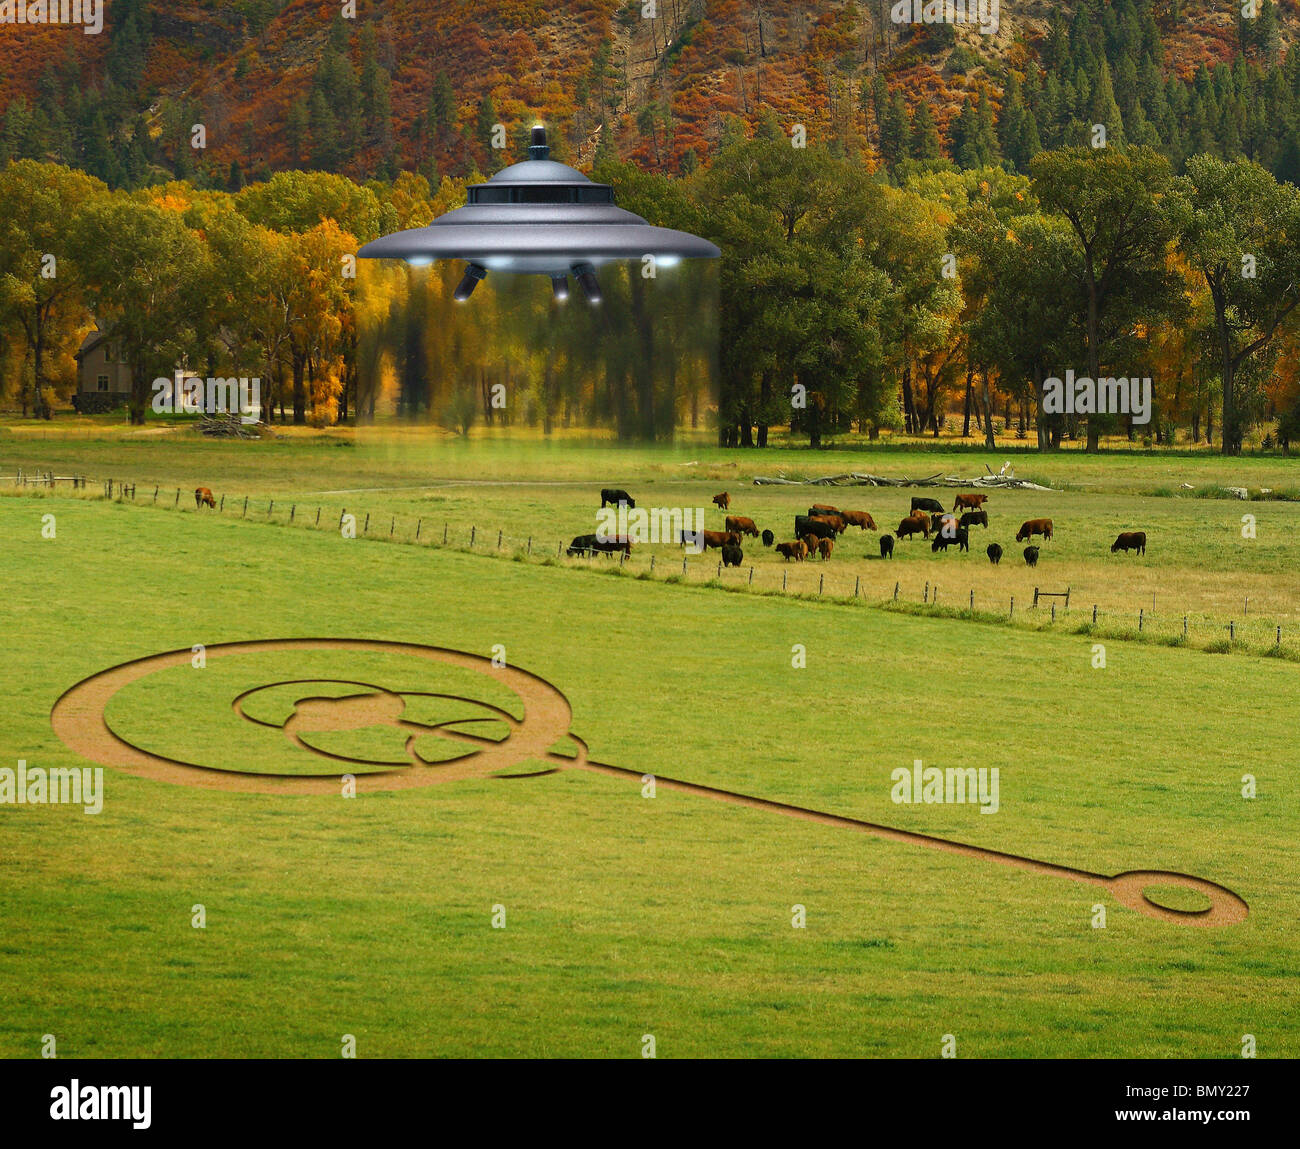 UFO hovering over cattle & crop circle Stock Photo